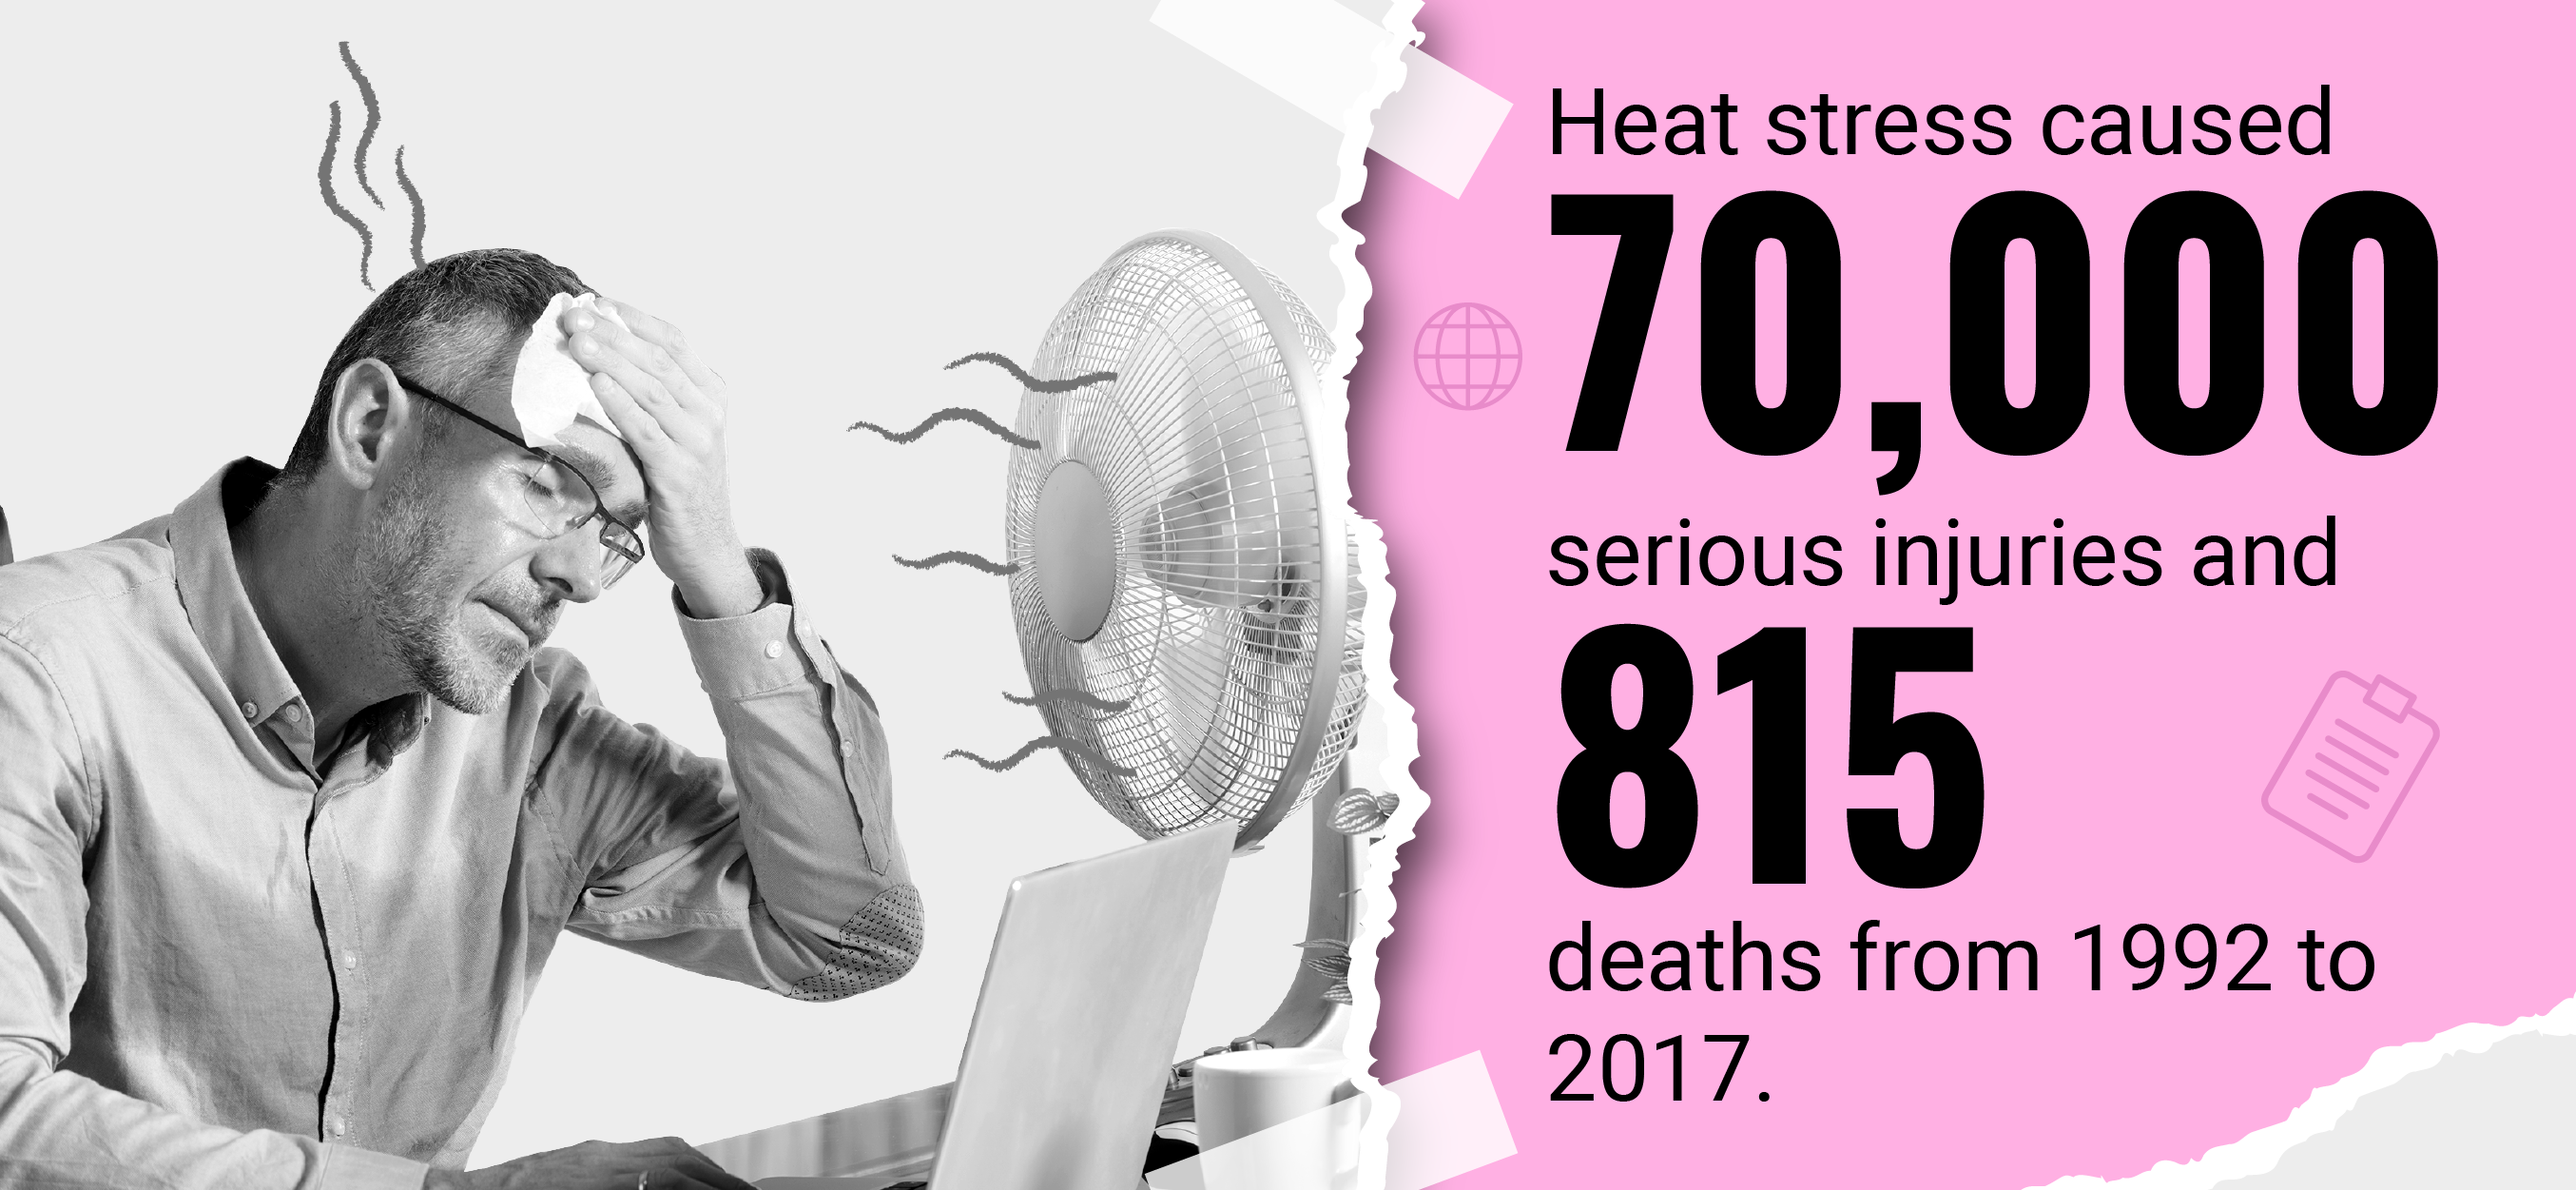 Call out text box saying heat stress caused 70,000 serious injuries and 815 deaths from 1992 to 2017.